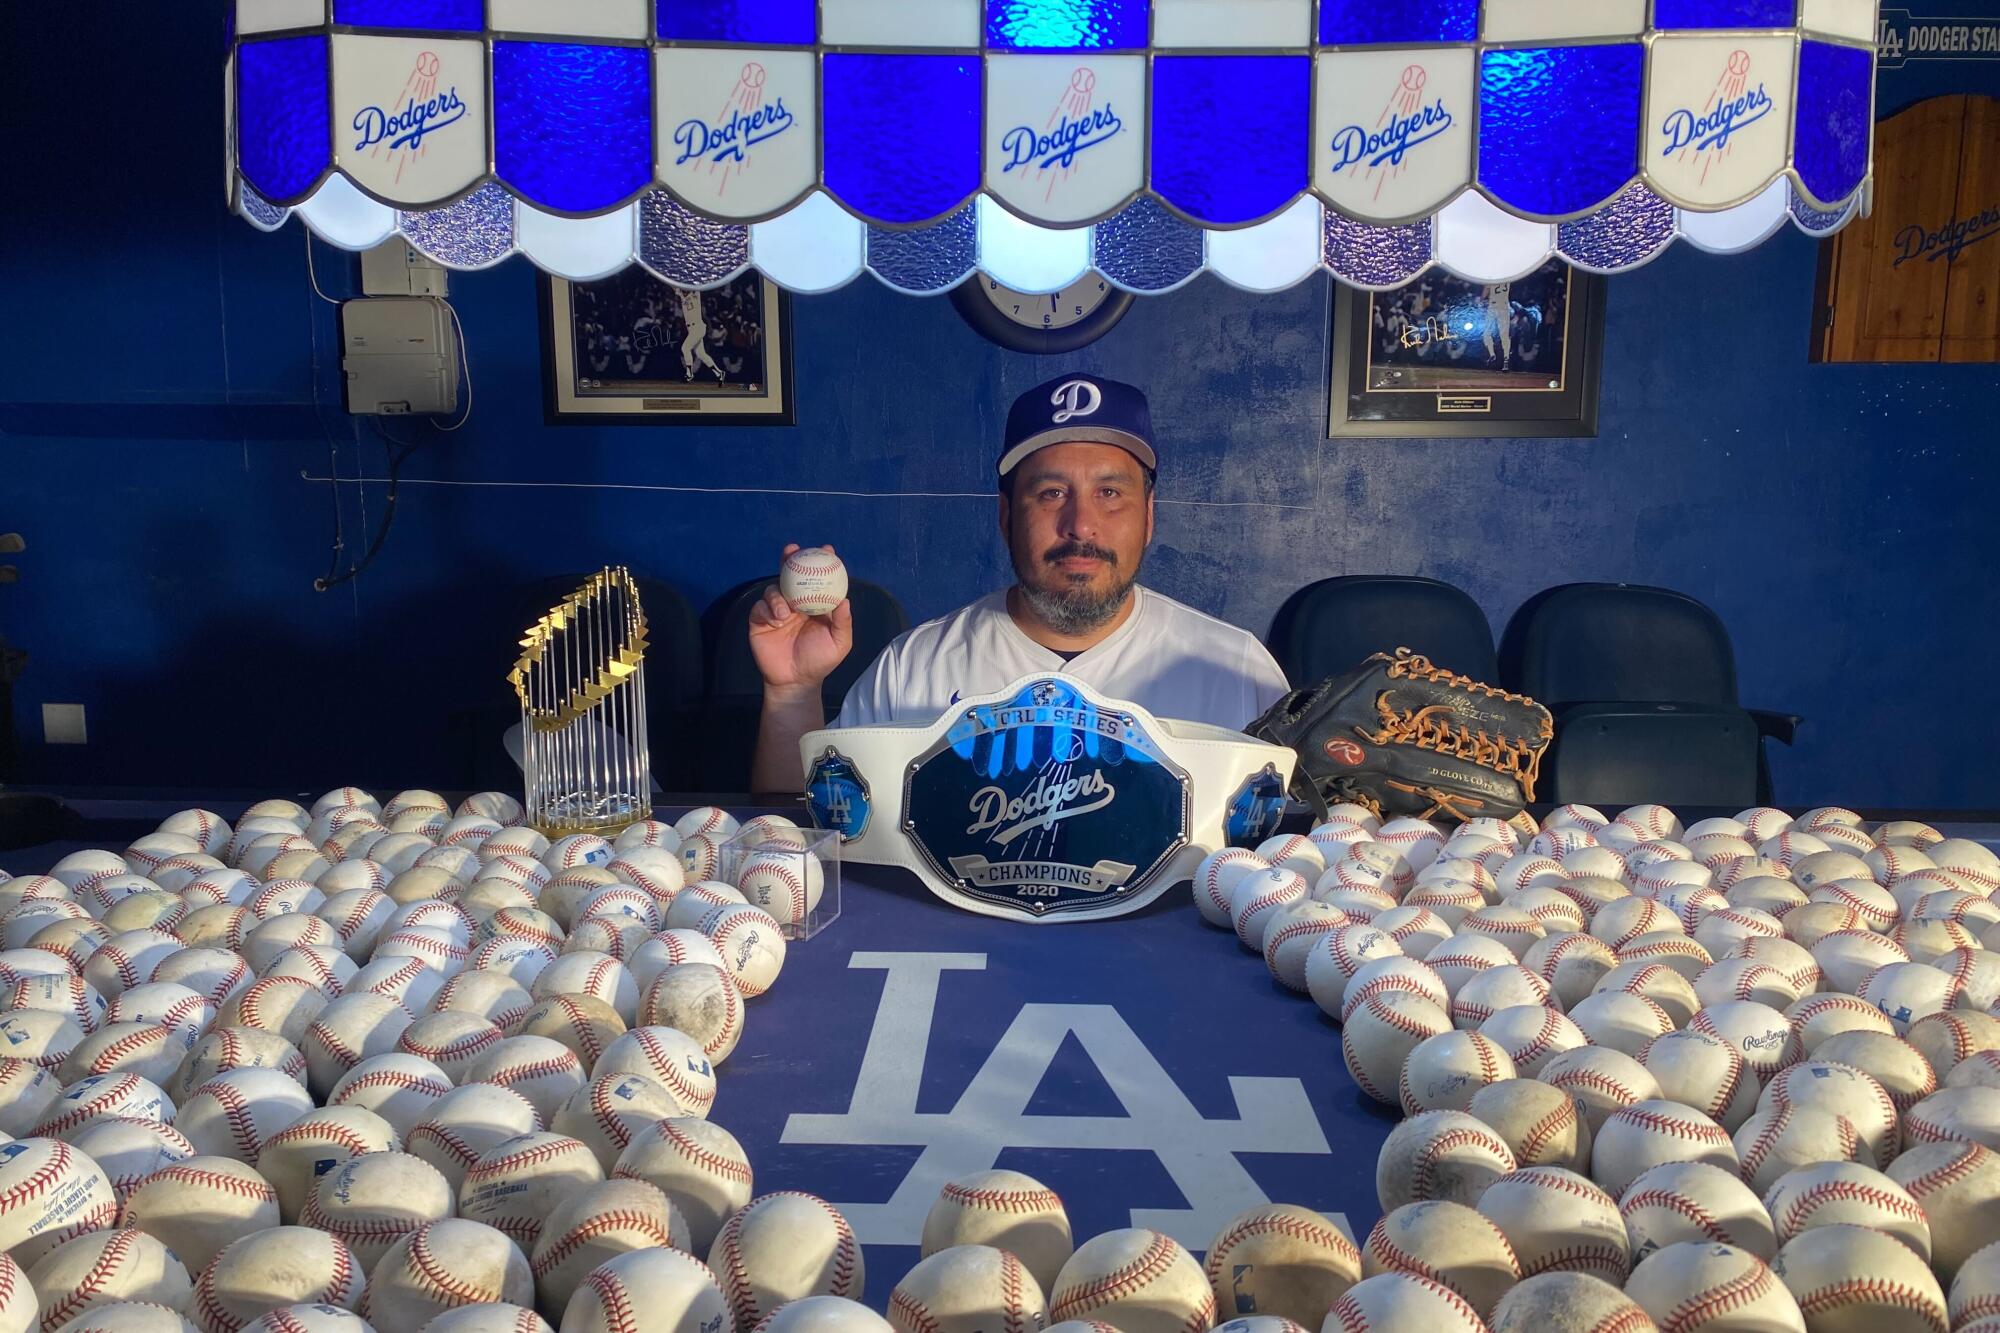 Renan Zuniga sits in his man cave surrounded by Dodgers memorabilia while holding the home run ball he caught.